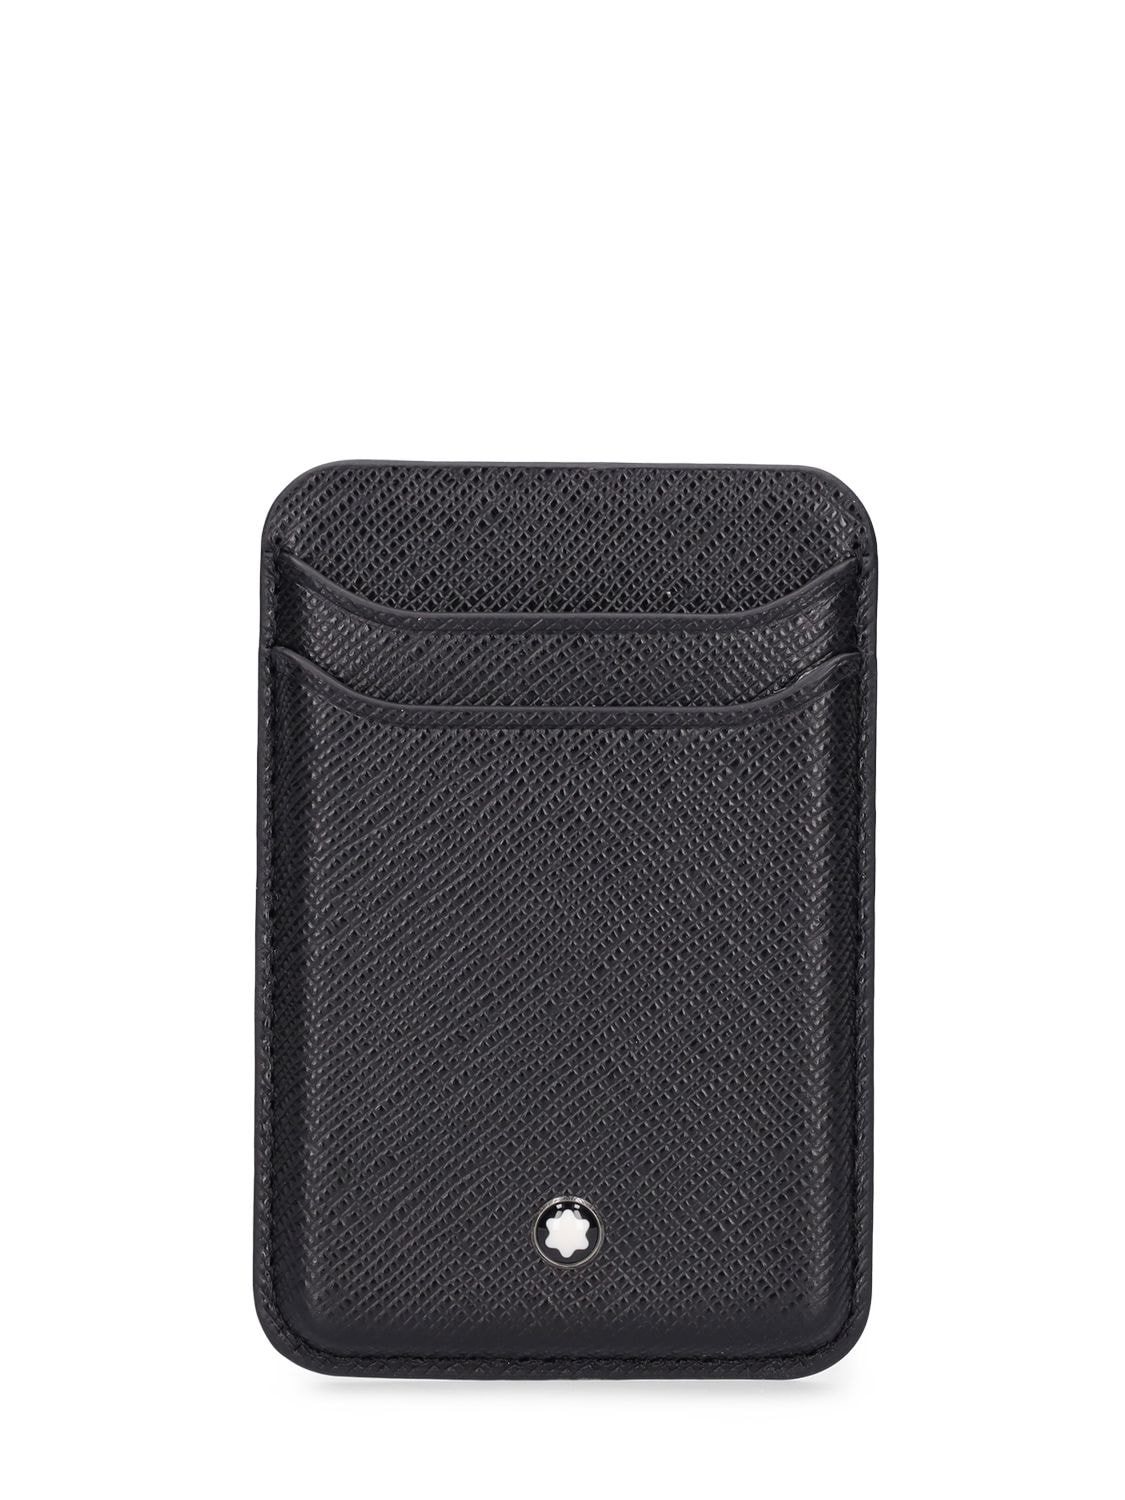 MONTBLANC MB SARTORIAL LEATHER CARD HOLDER